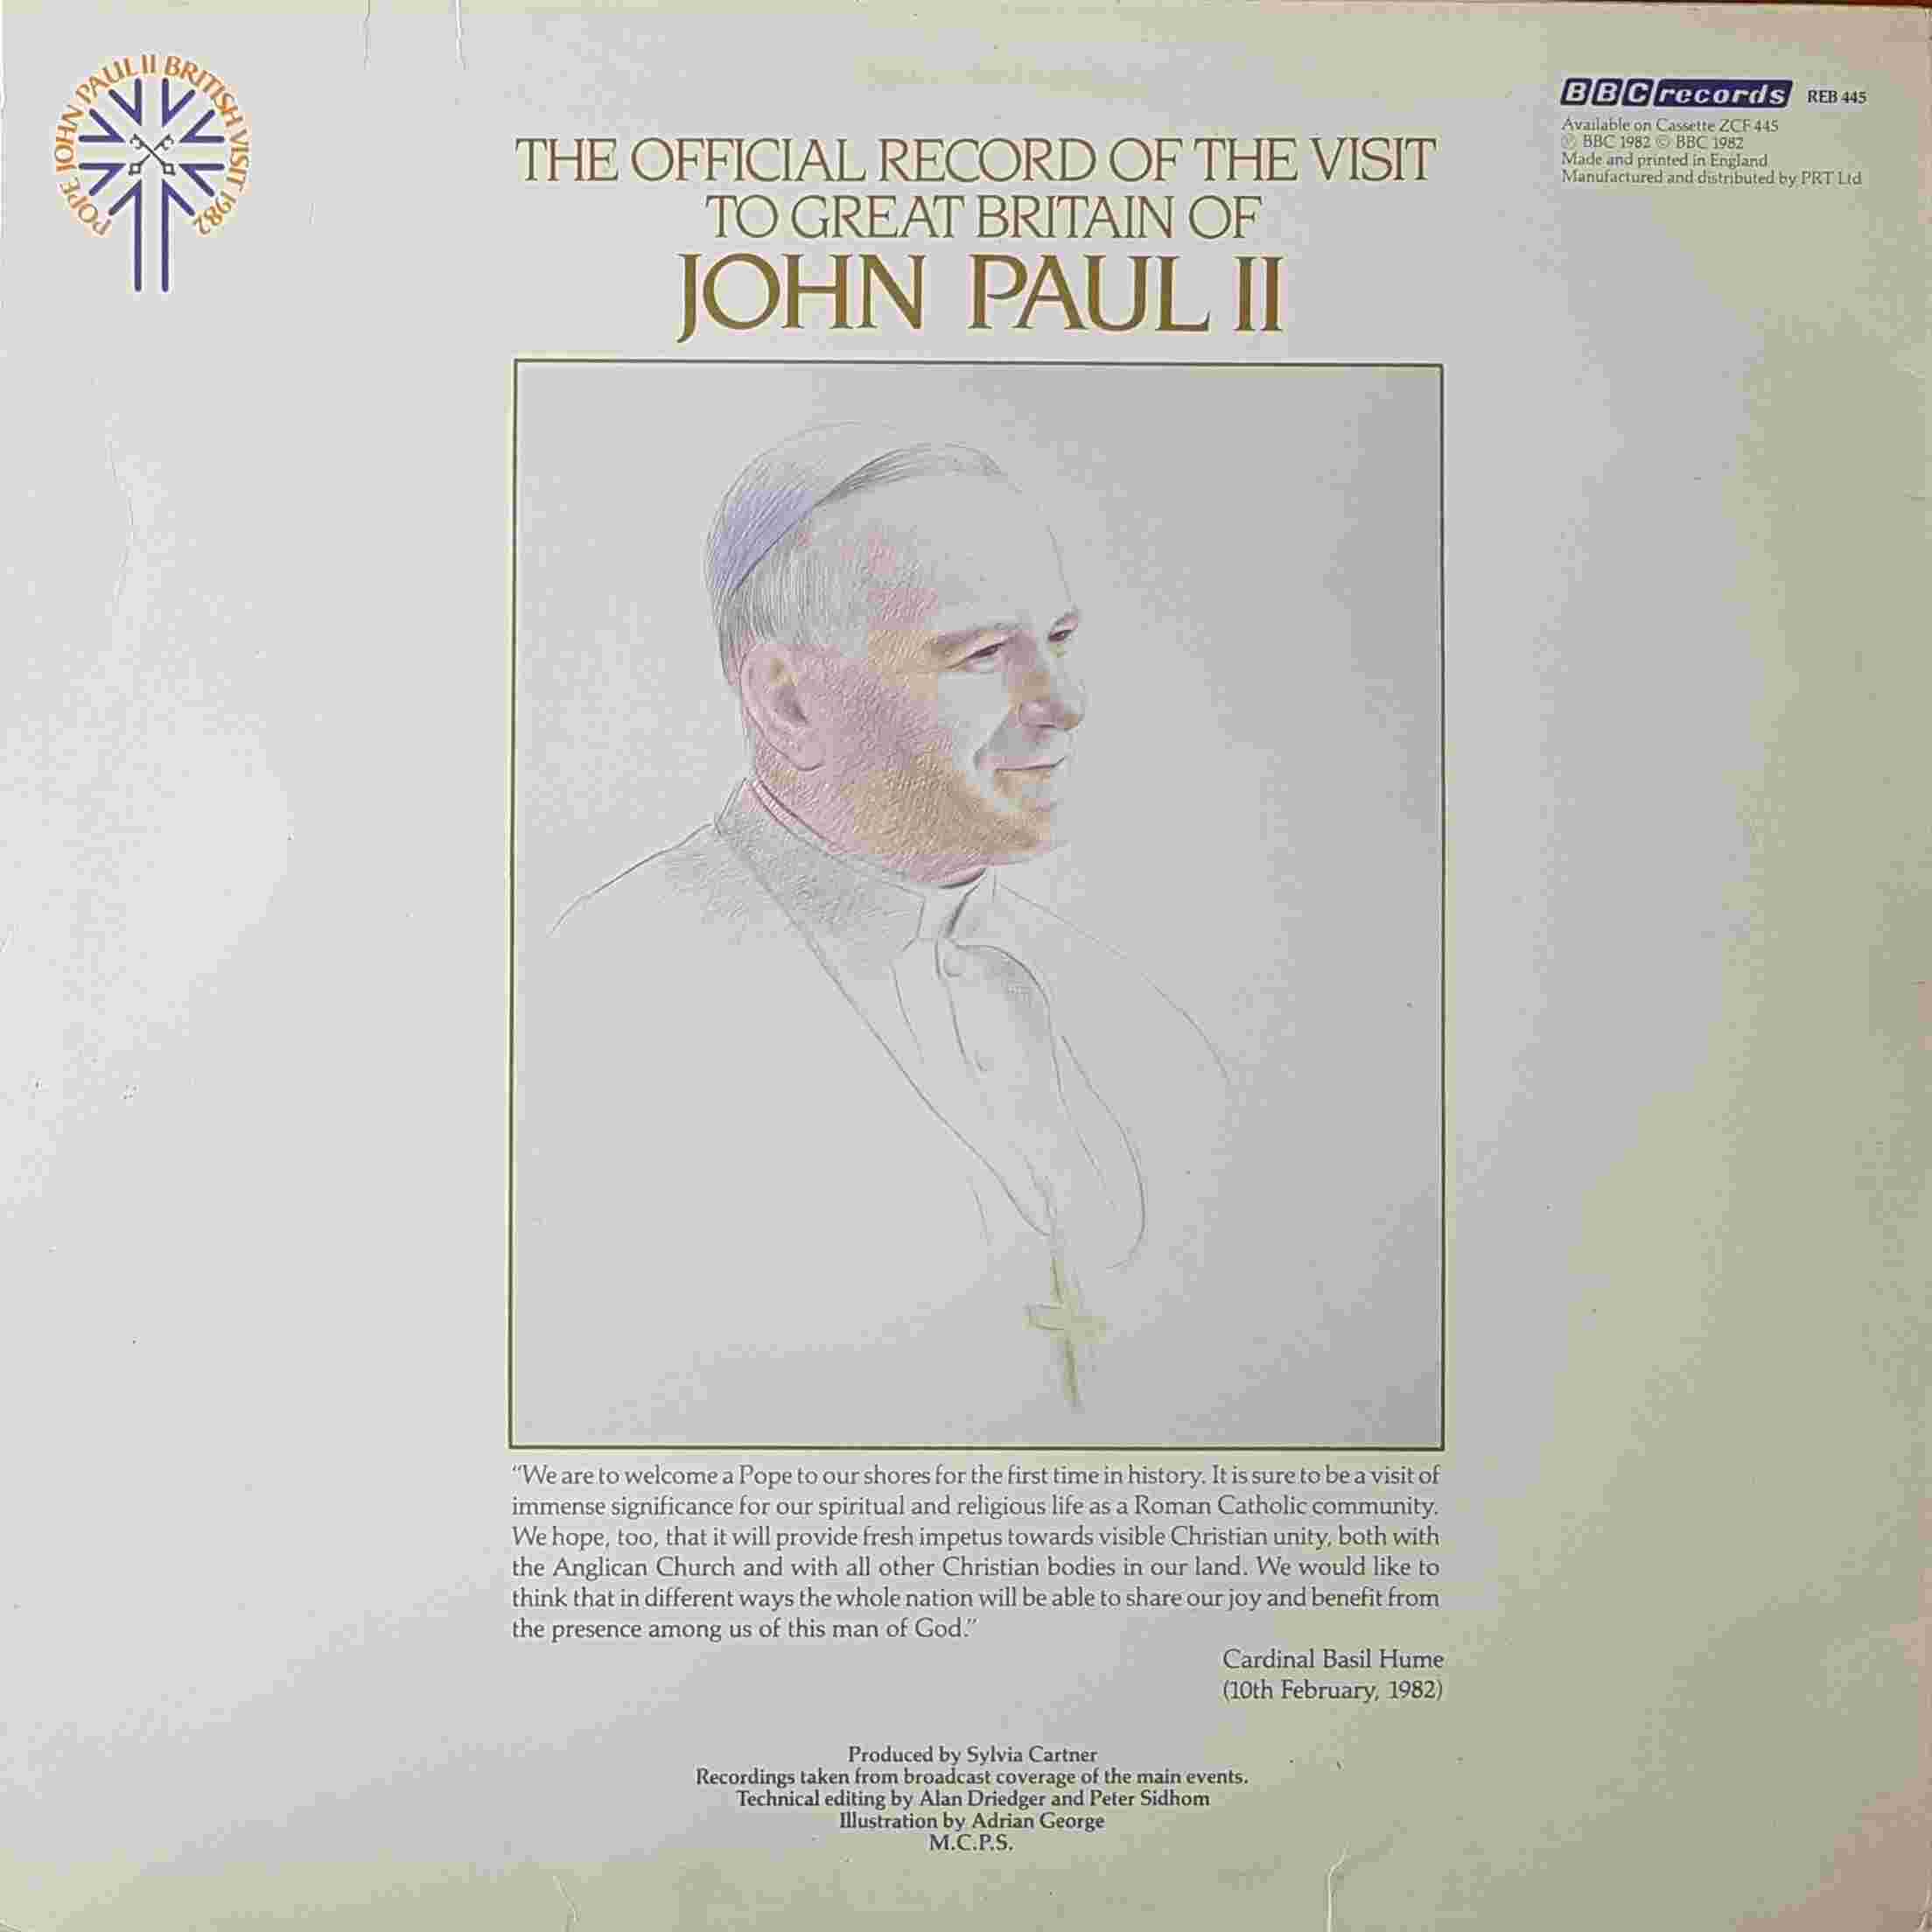 Picture of REB 445 John Paul II, the pilgrim pope by artist Various from the BBC records and Tapes library